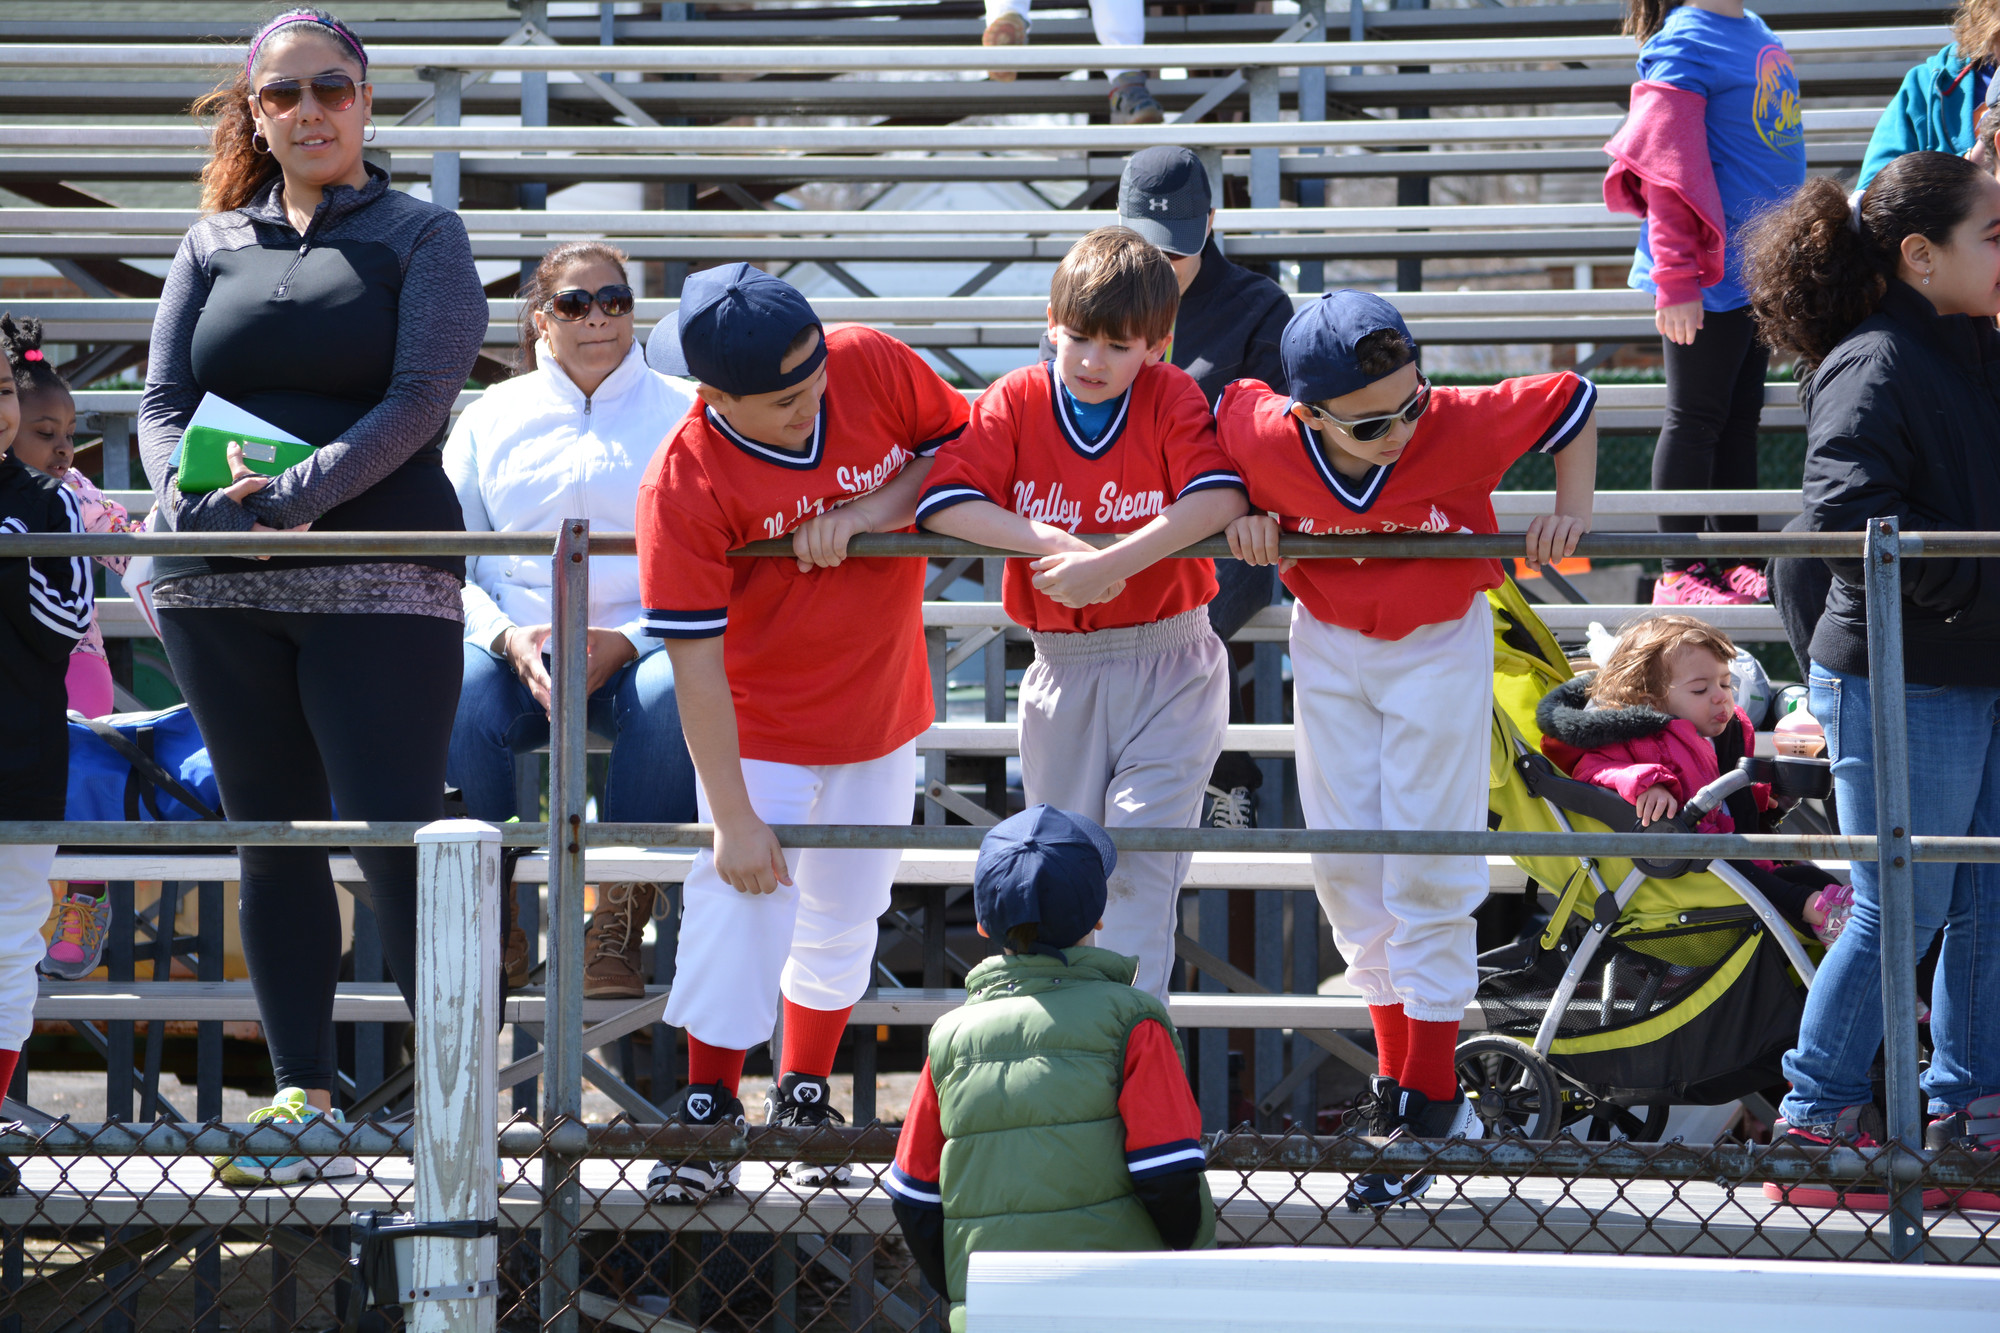 Little Leaguers chat as they wait for the opening day ceremonies to begin at Firemen’s Field on April 11.